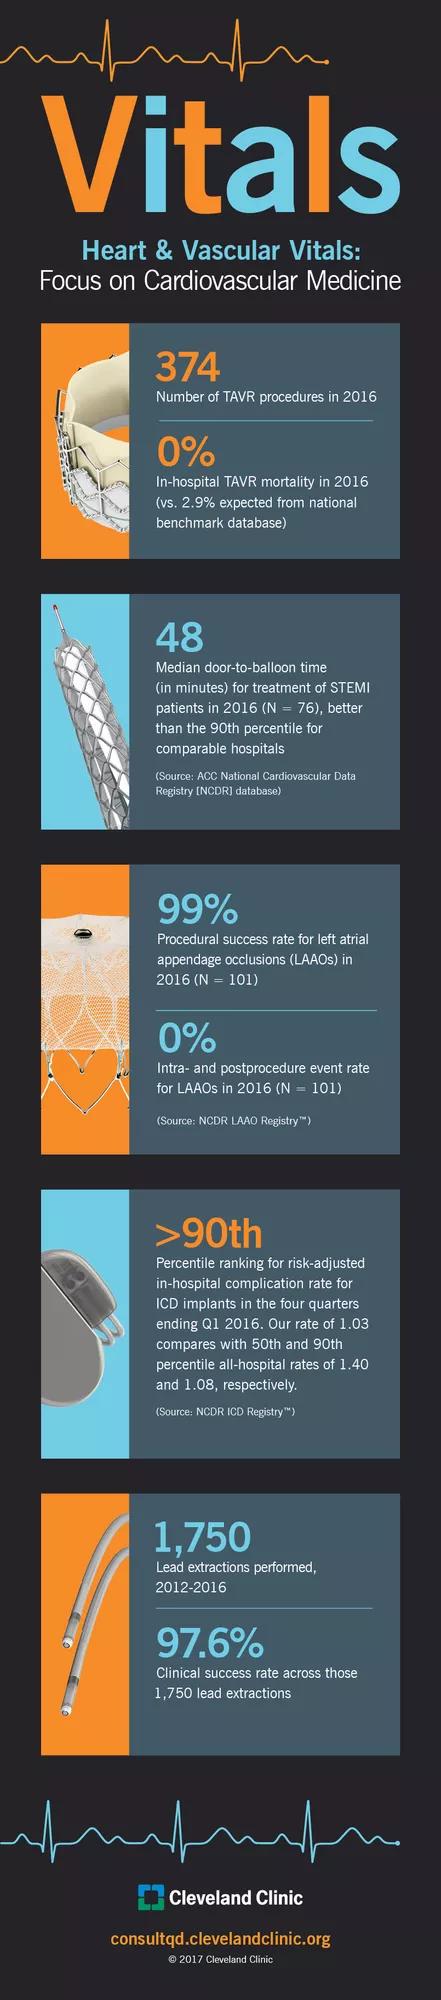 Vitals: A Glimpse of Cardiovascular Medicine Outcomes from 2016 (Infographic)